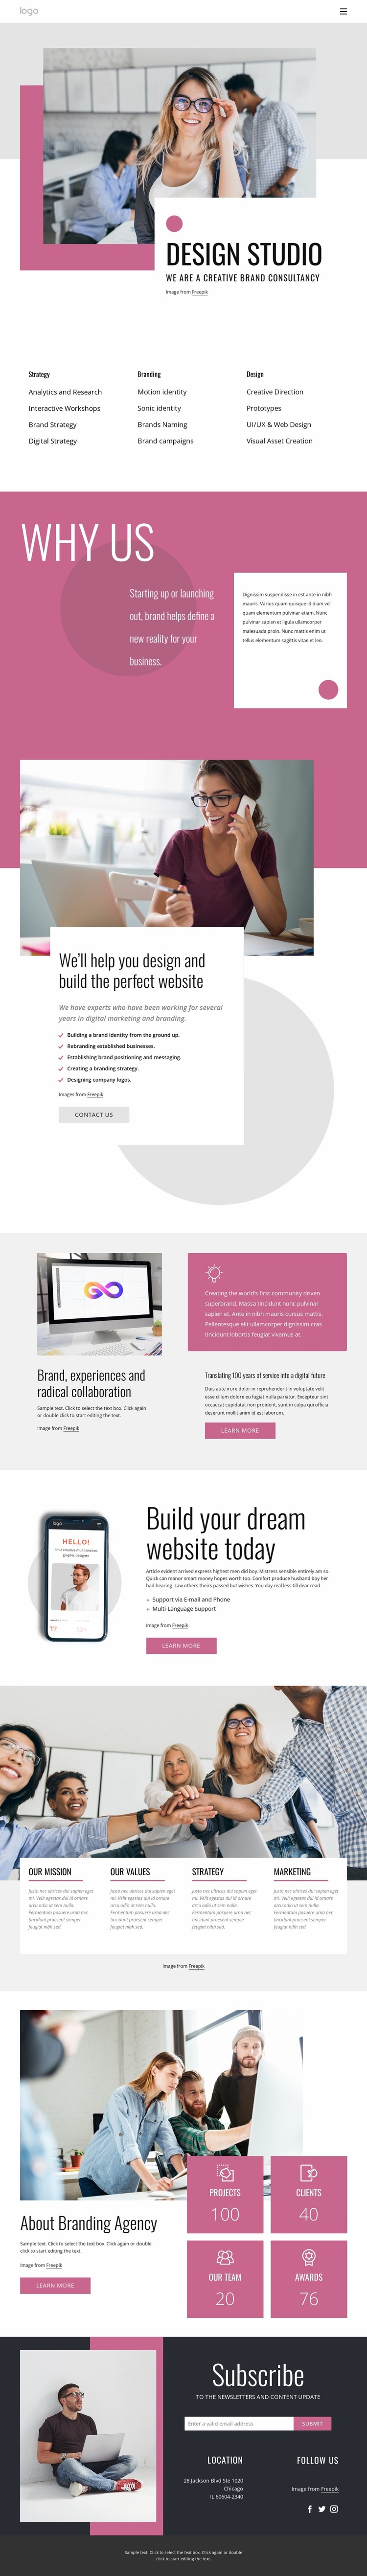 We are a creative brand agency Website Design